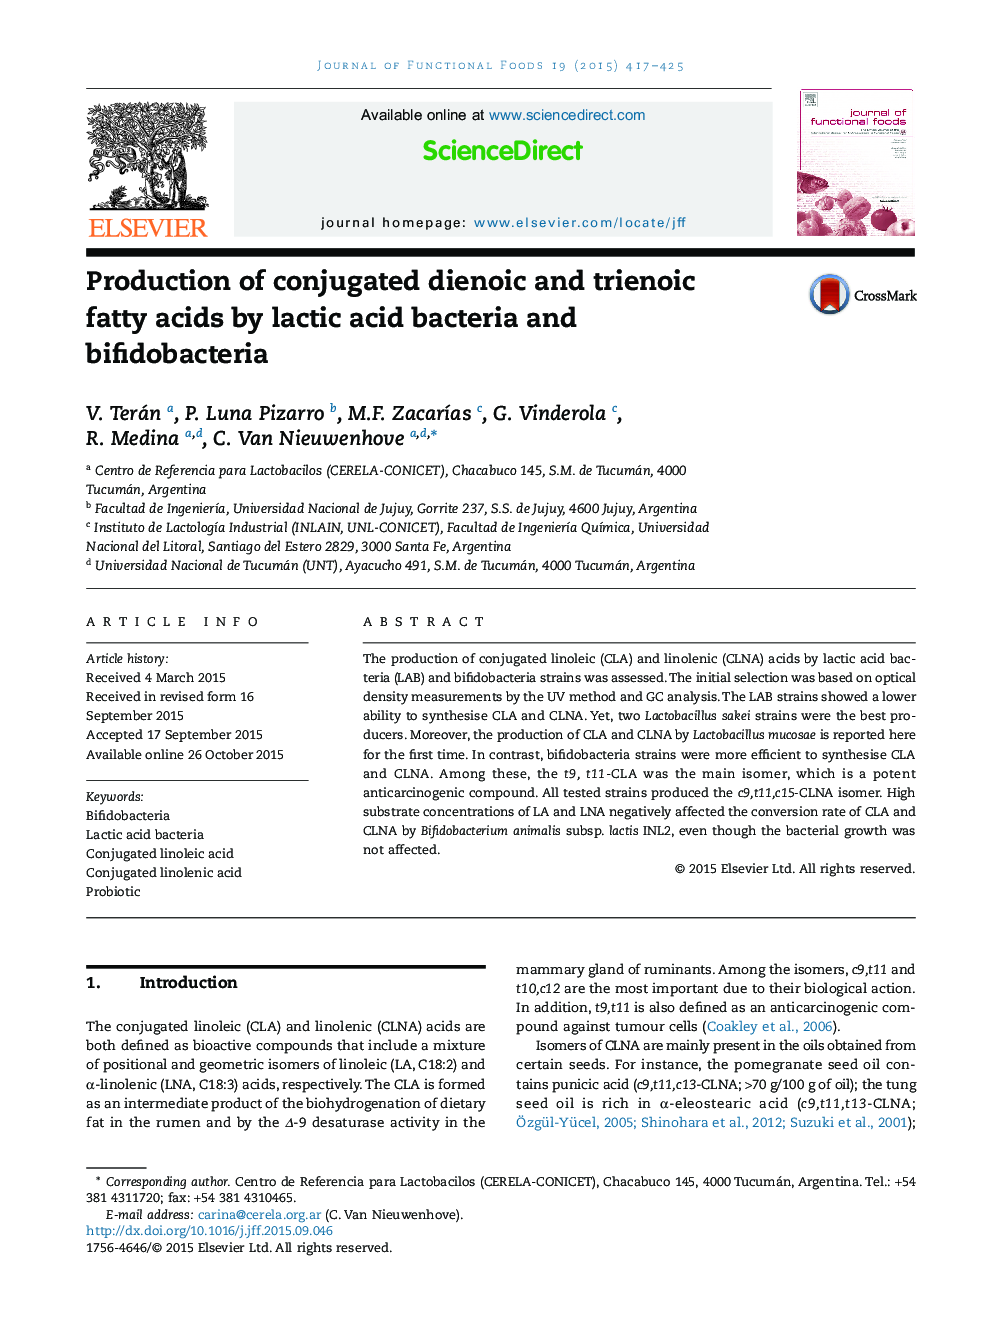 Production of conjugated dienoic and trienoic fatty acids by lactic acid bacteria and bifidobacteria